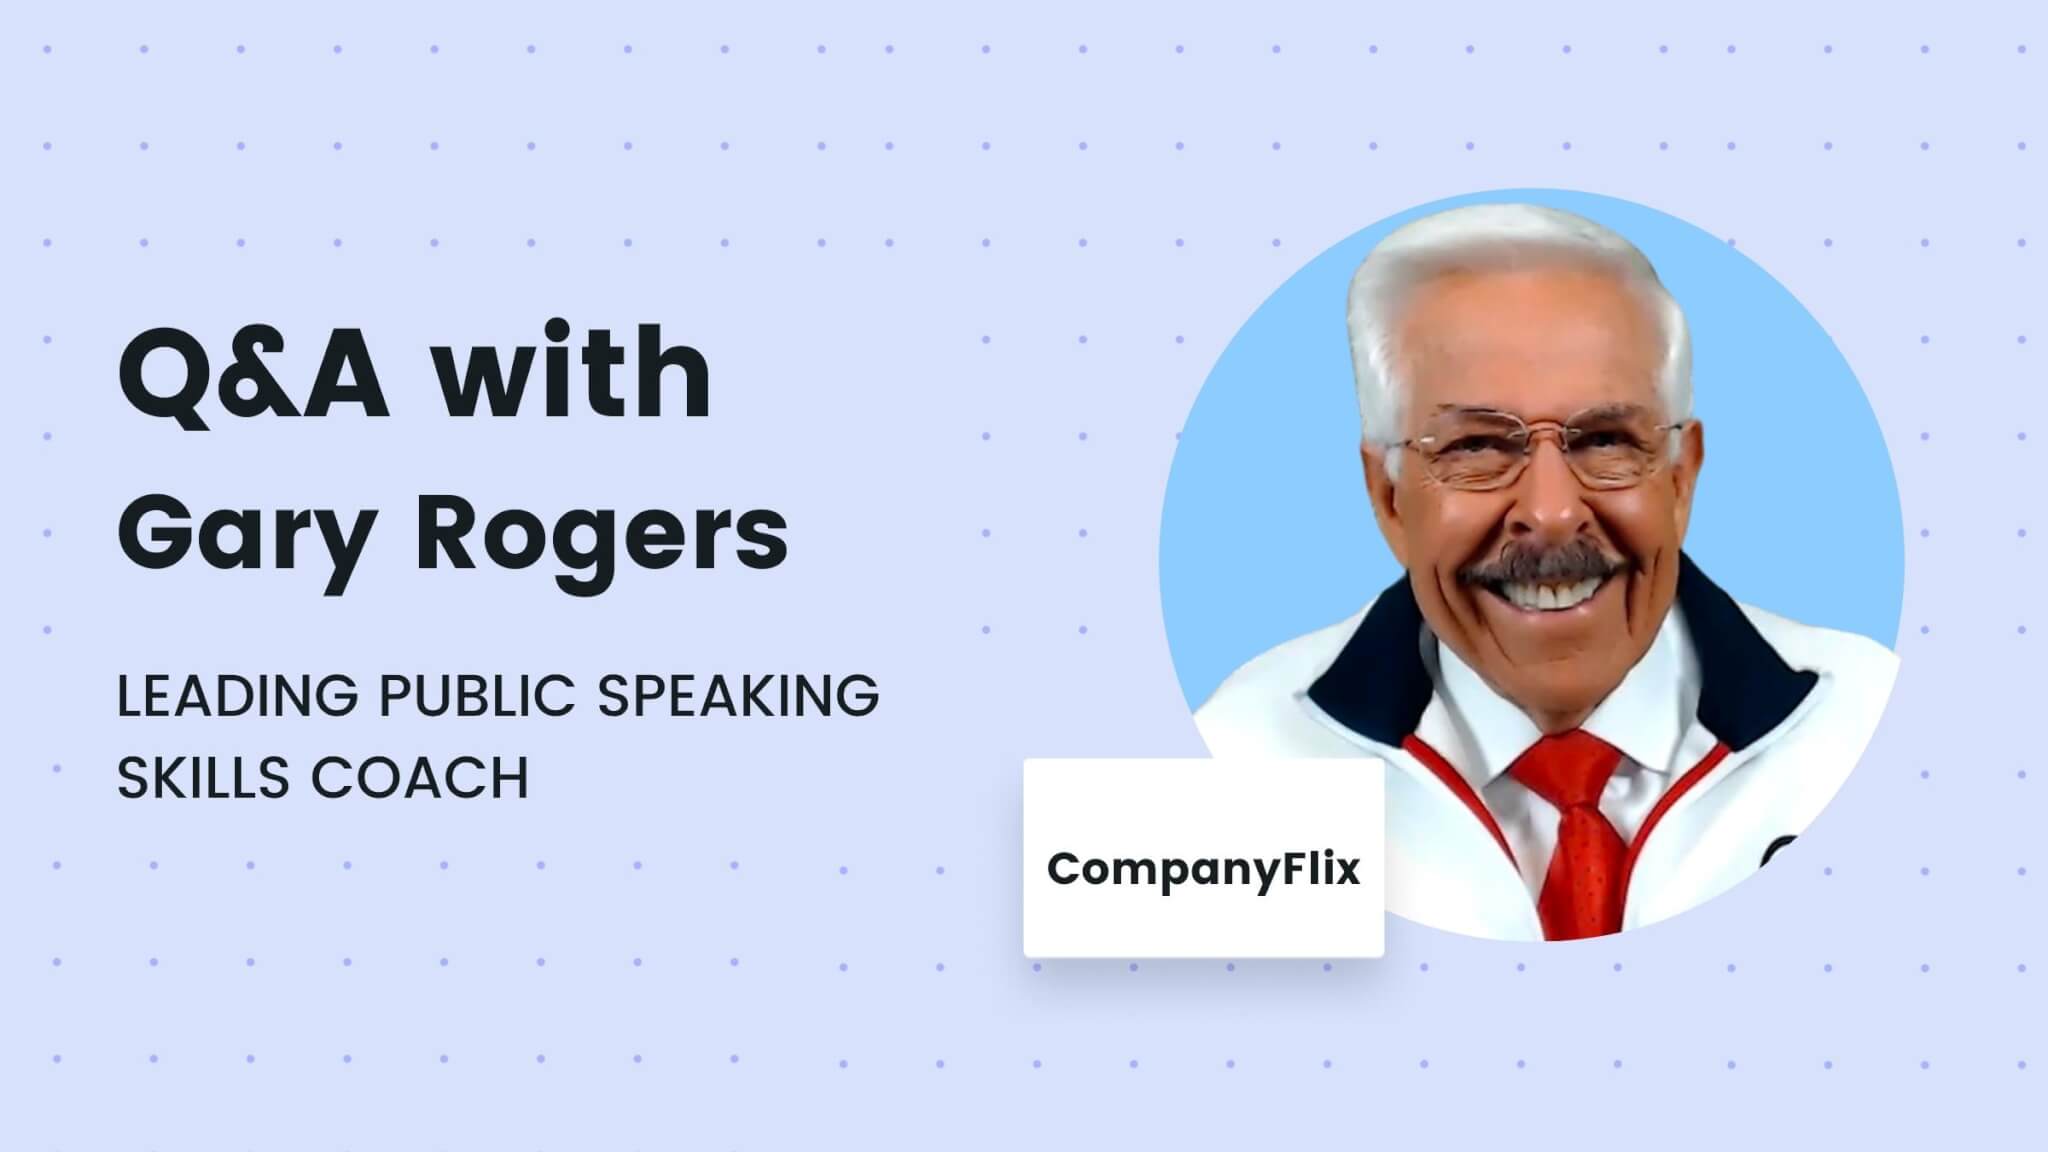 Gary Rogers: Mastering Public Speaking Through Training and Self Reflection